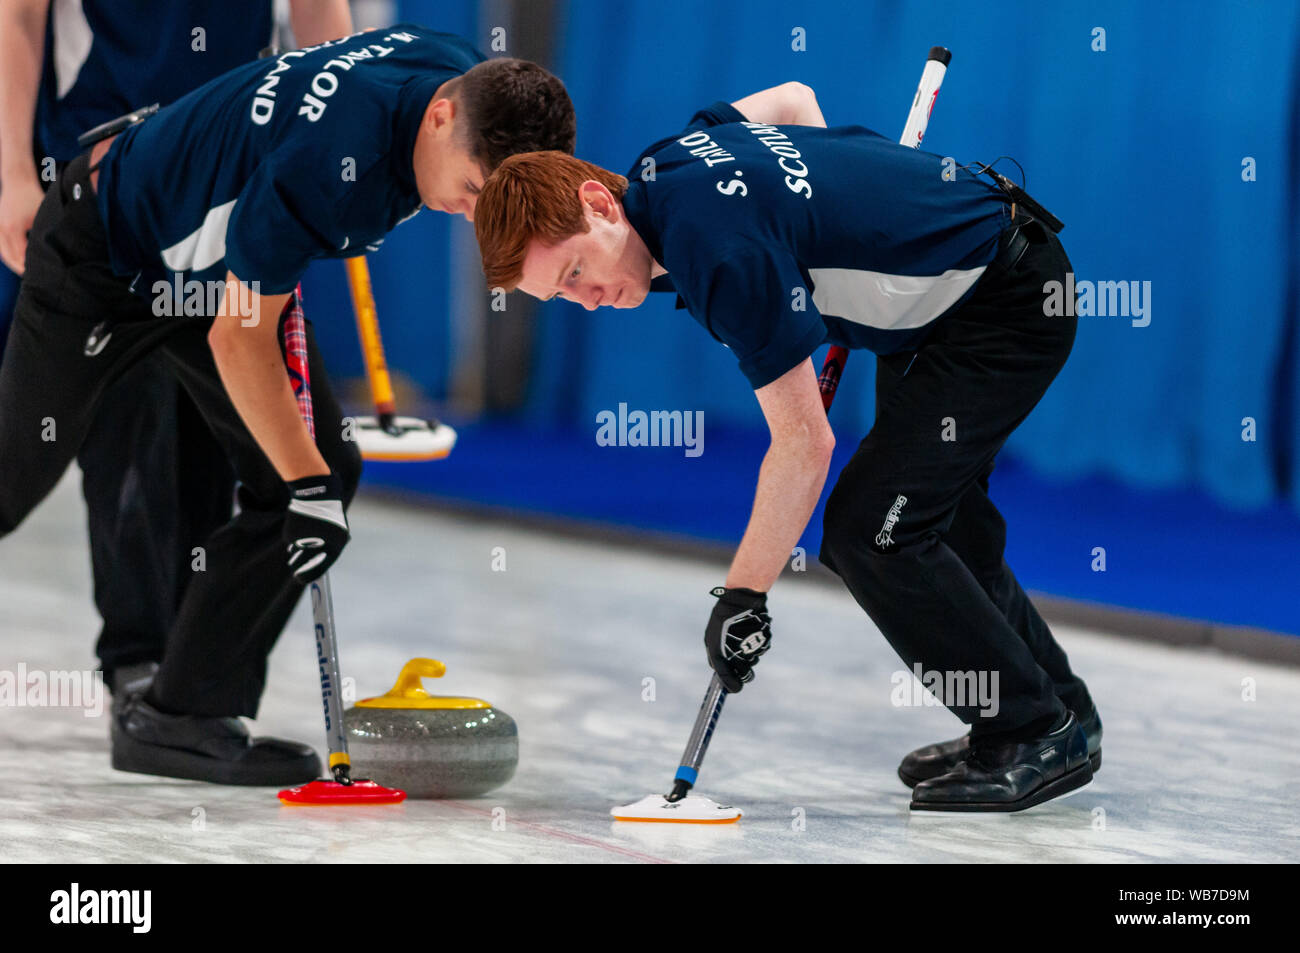 Raleigh, North Carolina, USA. 24th Aug, 2019. Aug. 24, 2019 Ã RALEIGH, N.C., US - MARK TAYLOR and STUART TAYLOR of Scotland in action during Curling Night in America at the Raleigh Ice Plex. Curling Night in America featured members of the U.S. Olympic menÃs gold medal team from the 2018 Winter Olympics in South Korea, the U.S. womenÃs team, as well as teams from Italy, Japan, and Scotland, Aug. 22-24, 2019. Credit: Timothy L. Hale/ZUMA Wire/Alamy Live News Stock Photo